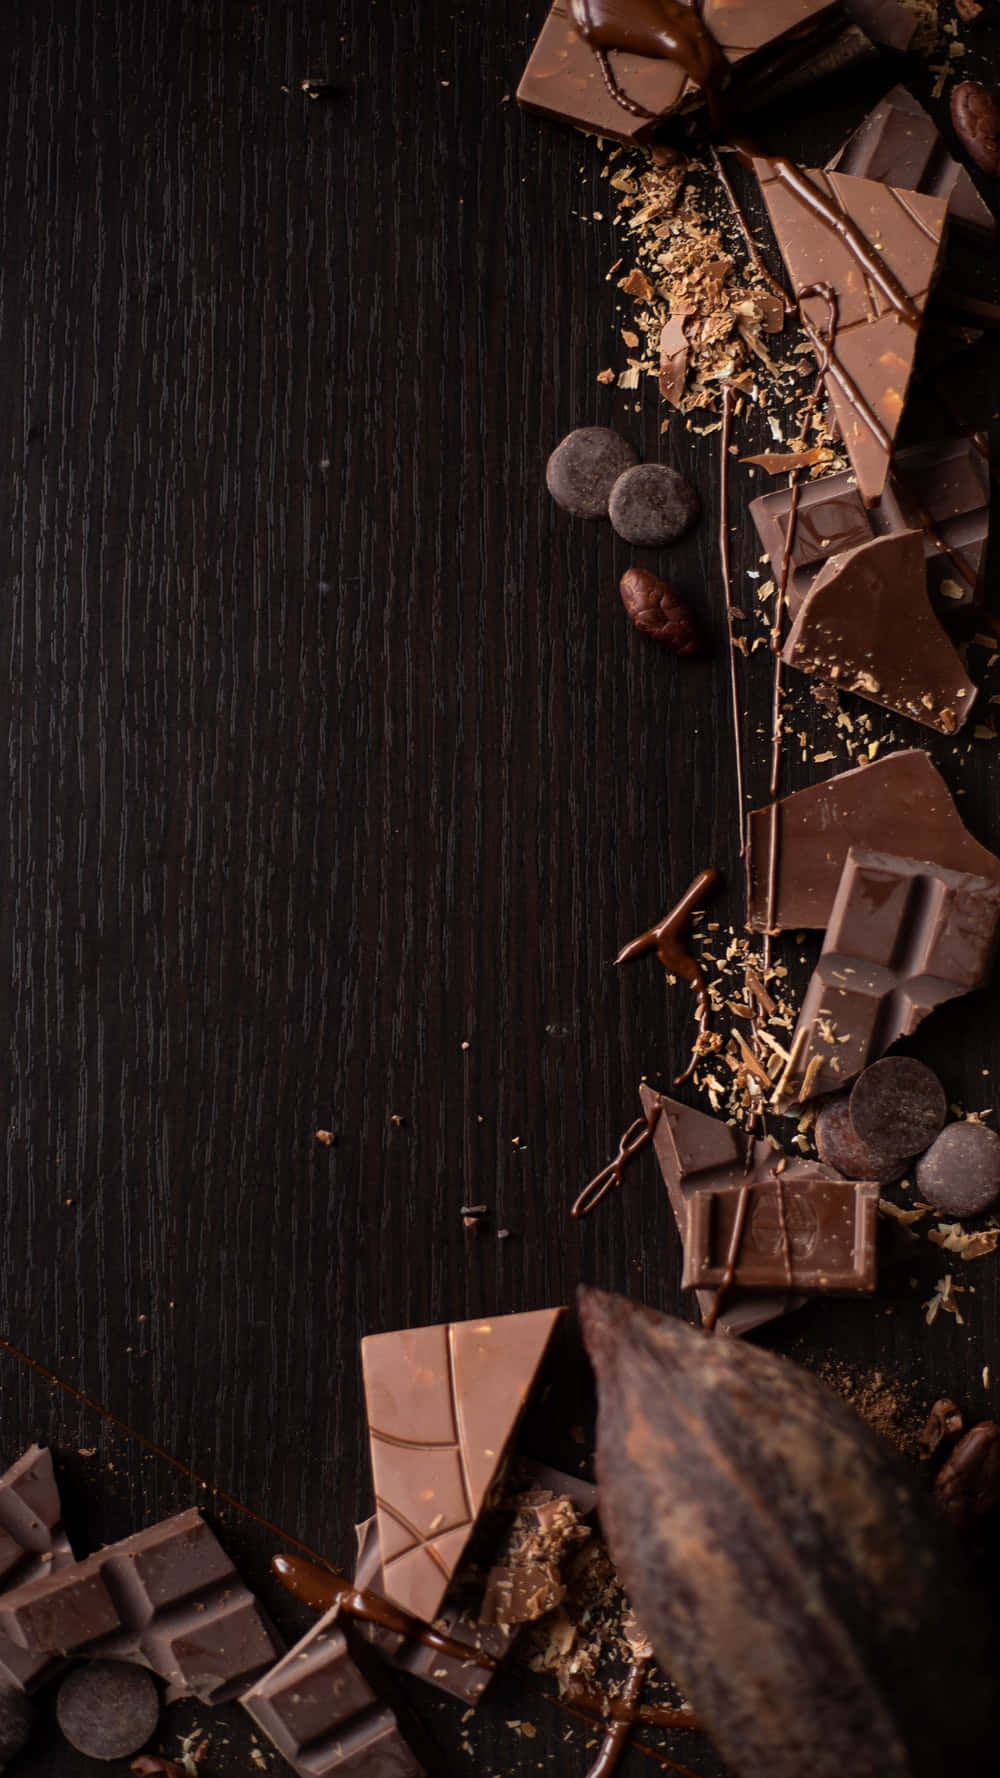 Mouthwatering Dark Chocolate Pieces Wallpaper